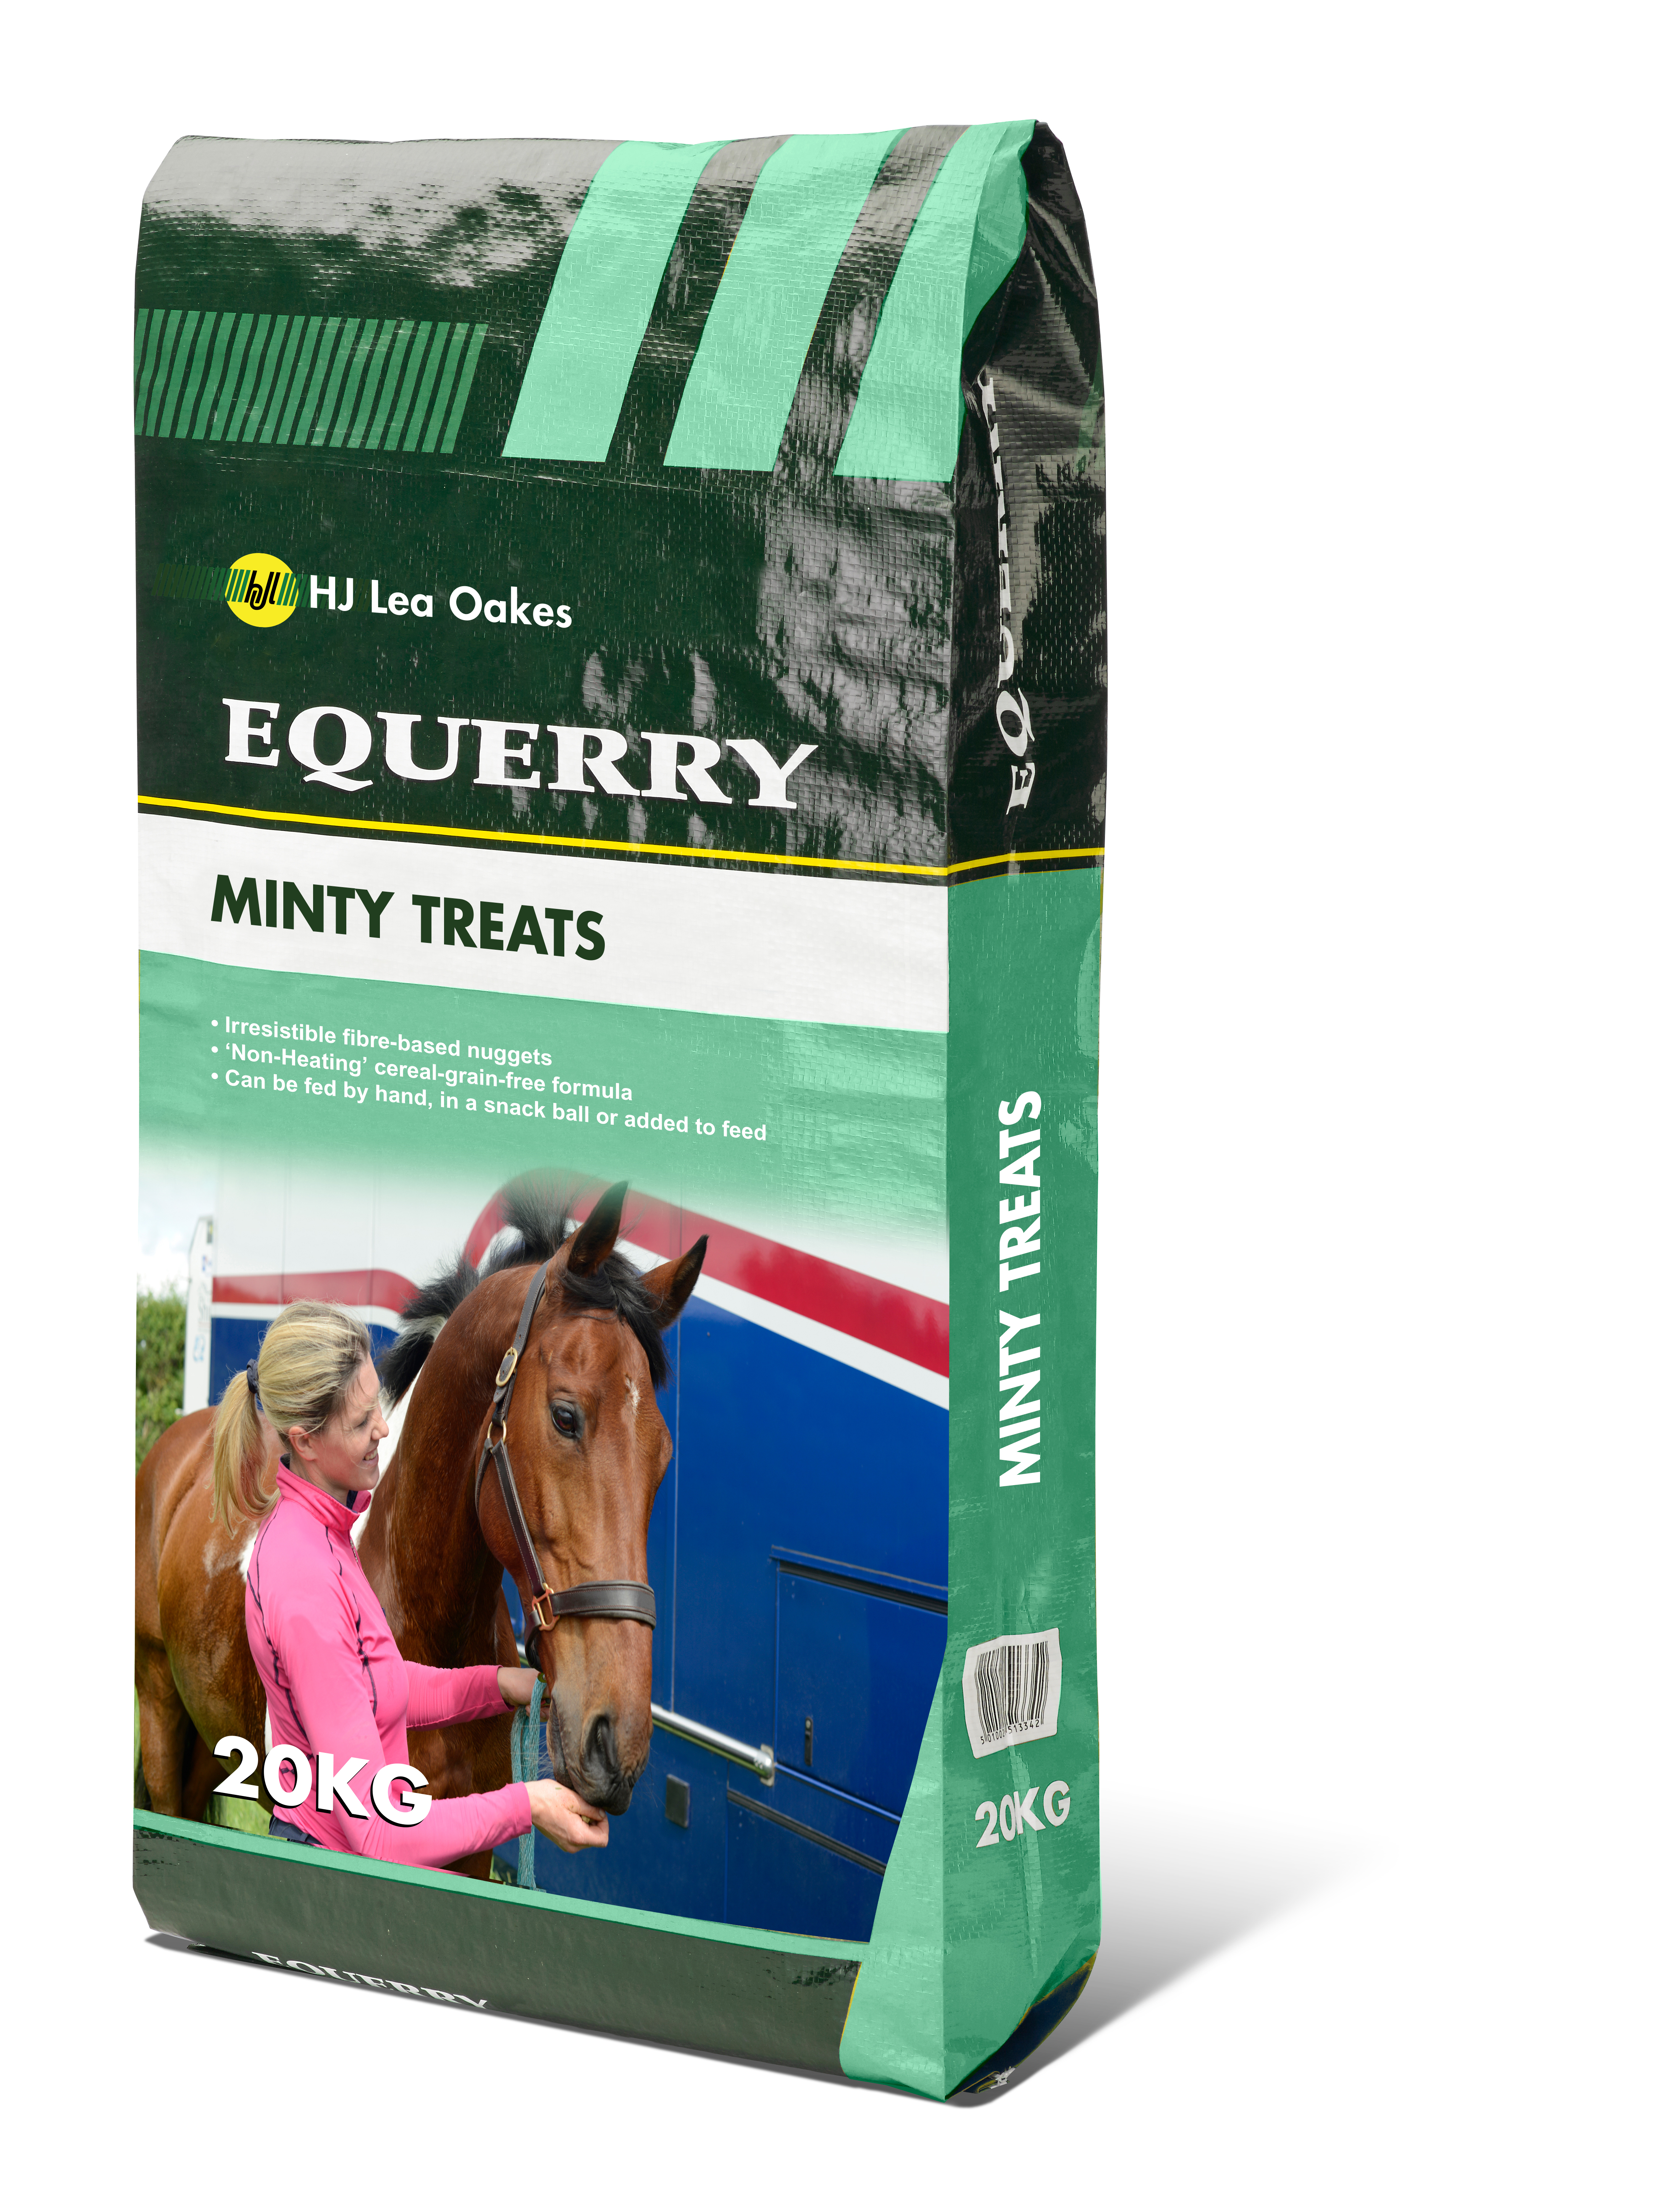 Equerry minty treats